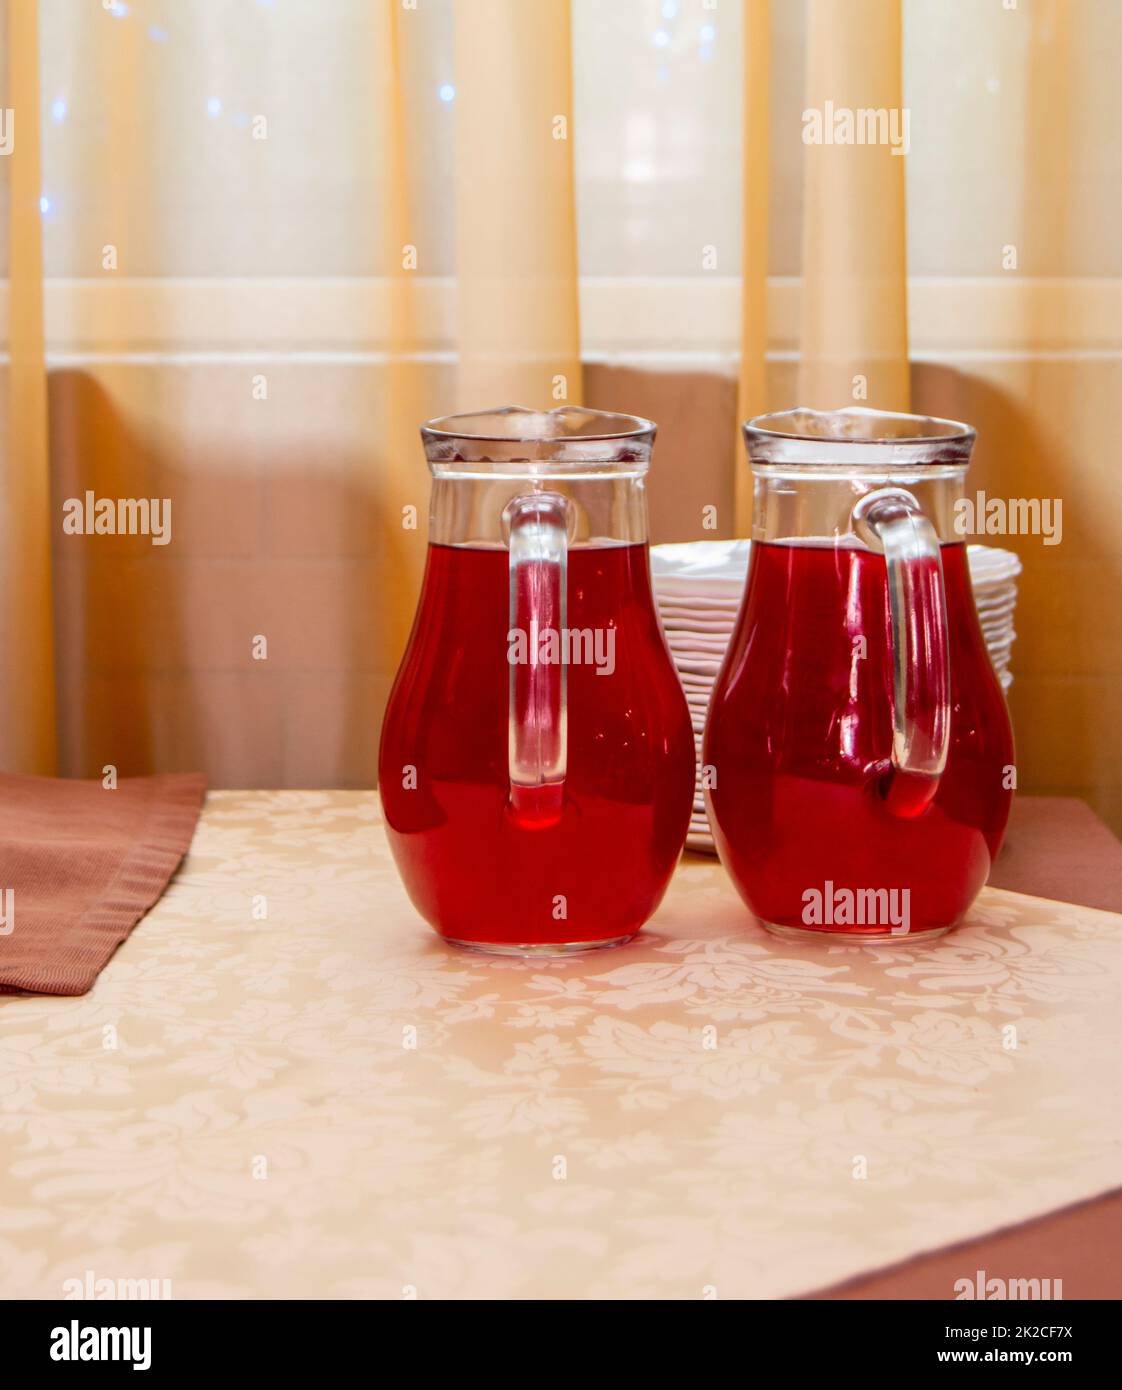 Two glass jugs of cranberry juice on the table Stock Photo